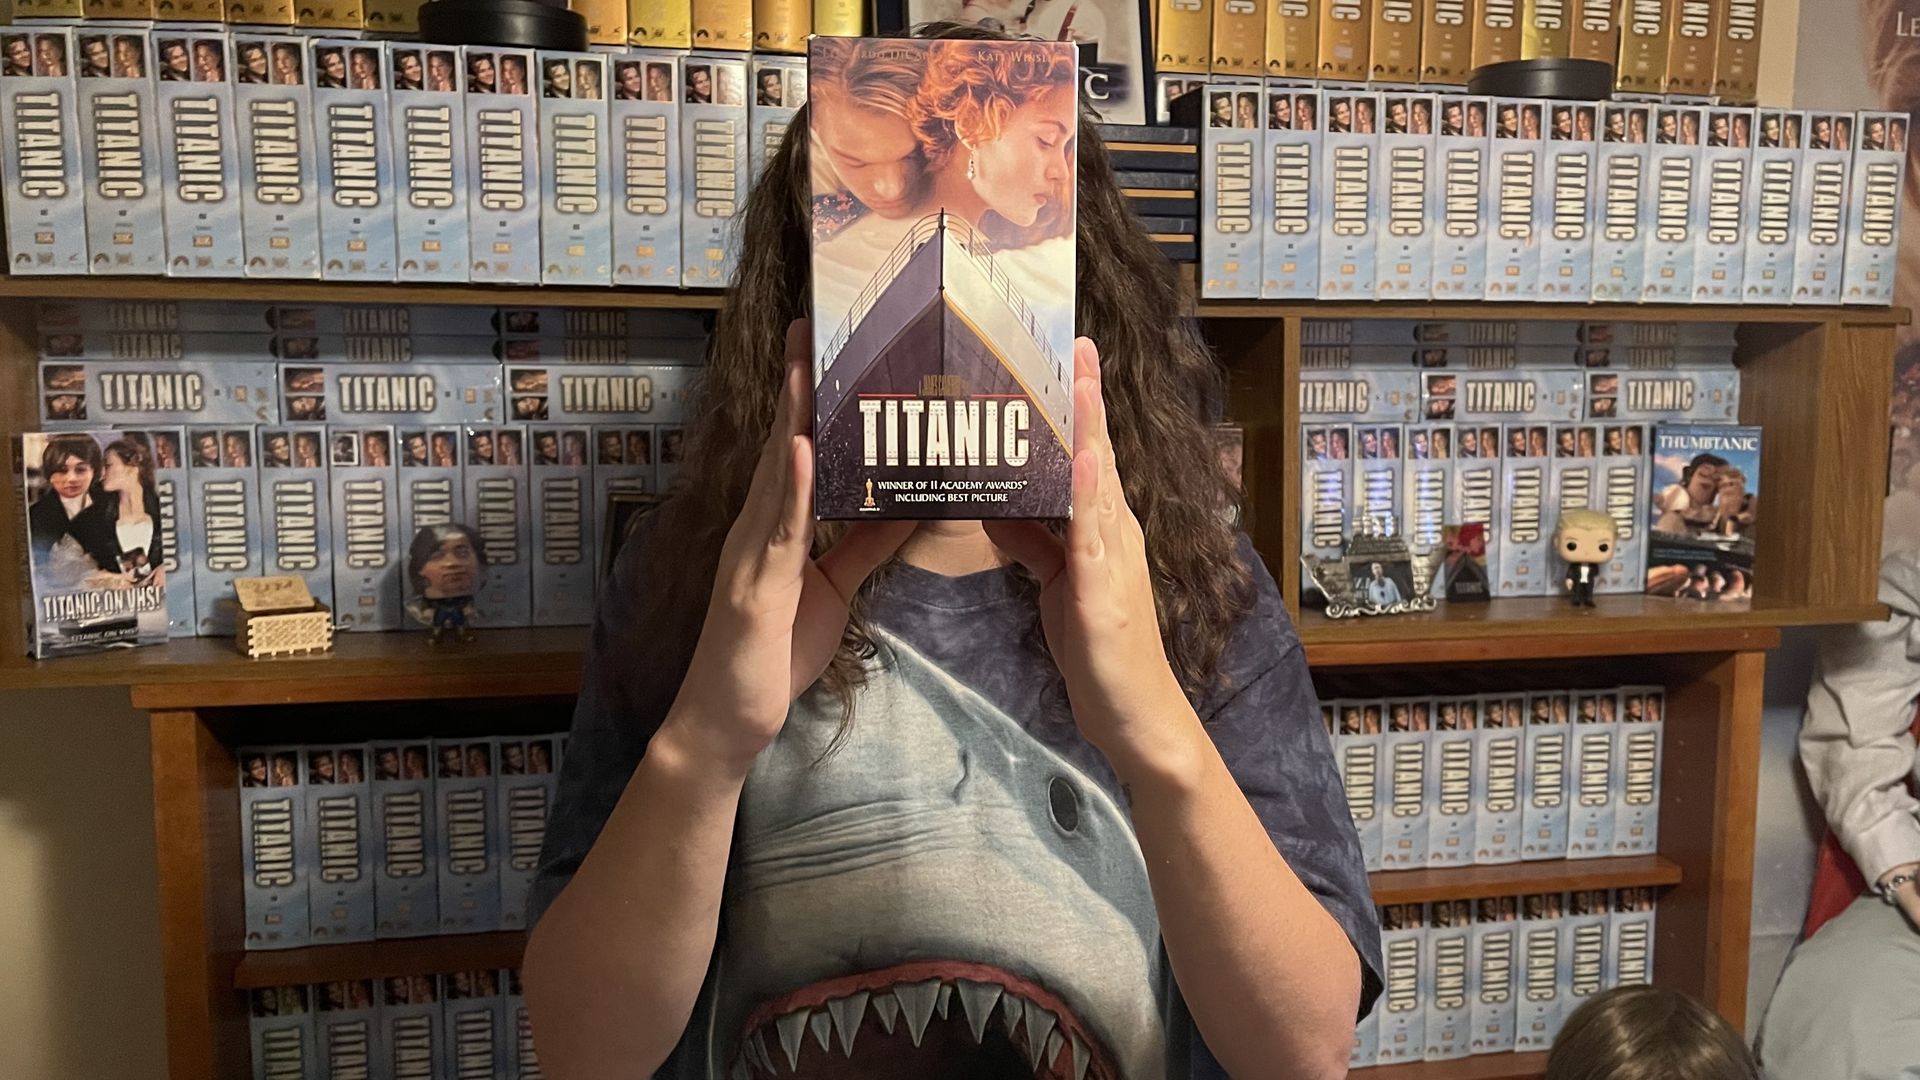 @titanicfan97 with his collection, holding a copy of "Titanic" on VHS in front of his face